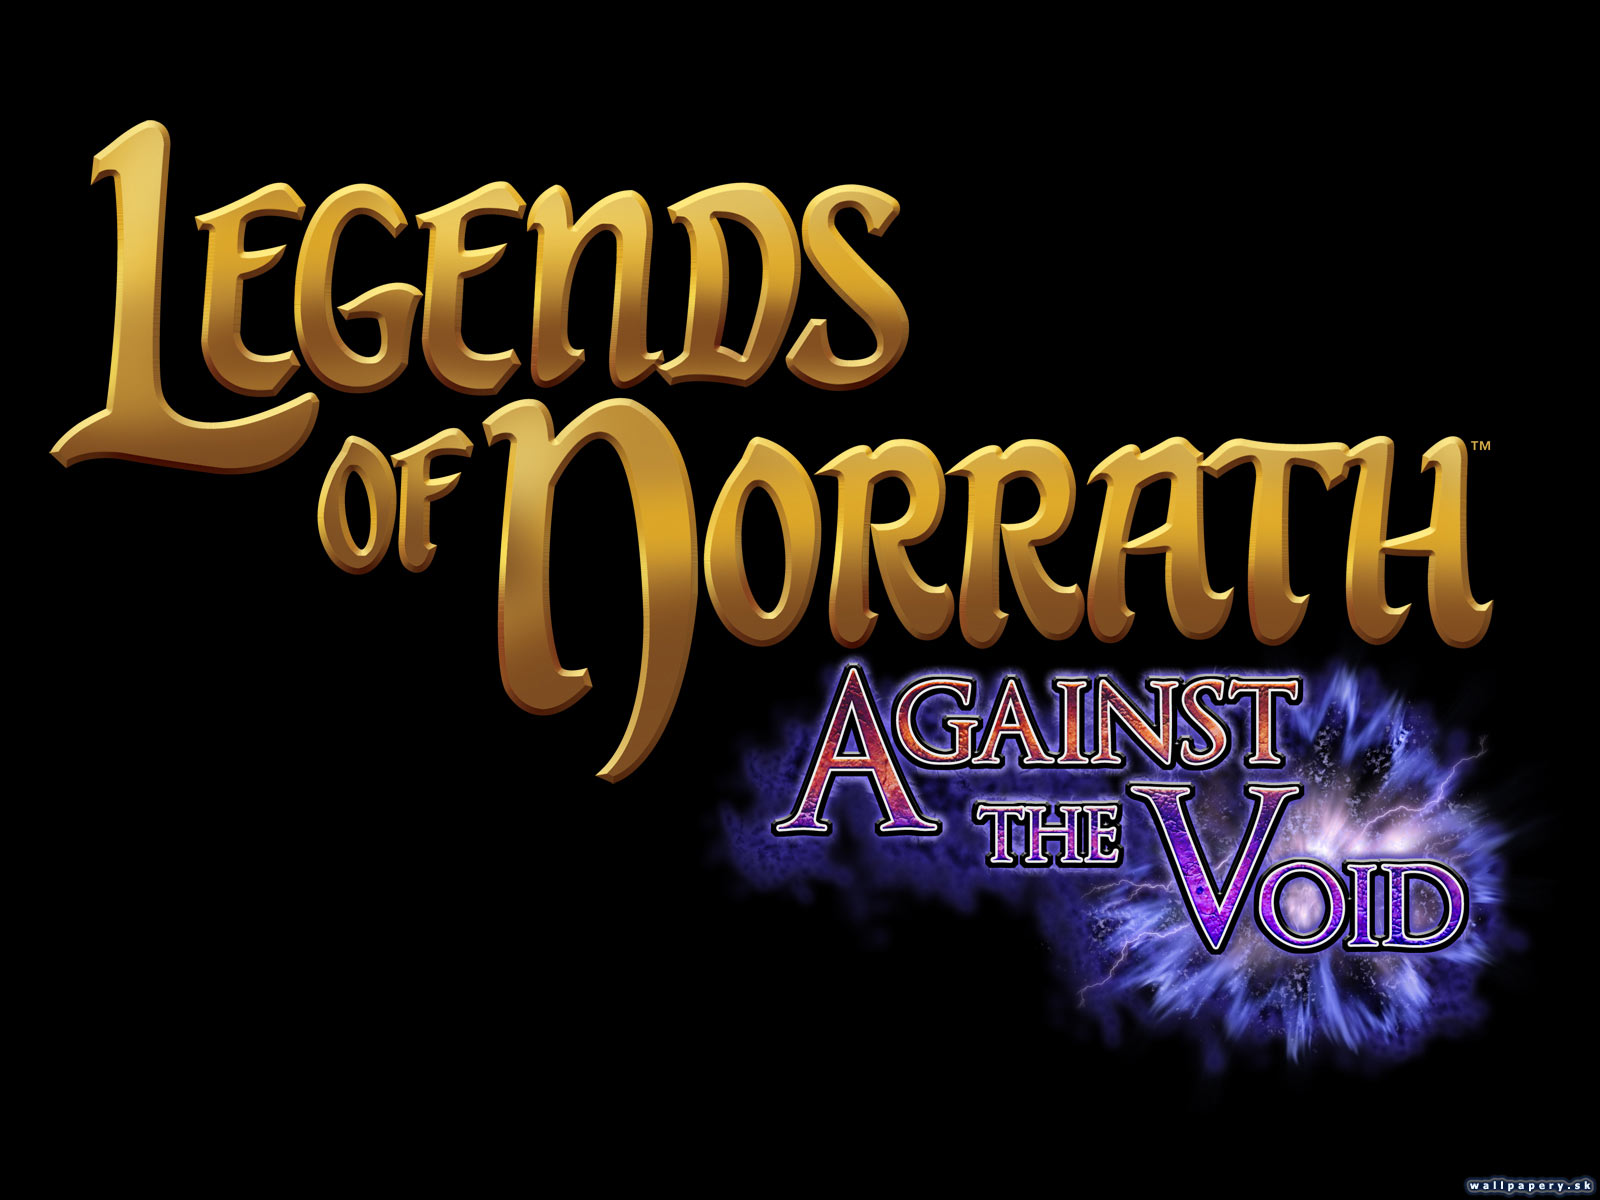 Legends of Norrath: Against The Void - wallpaper 1